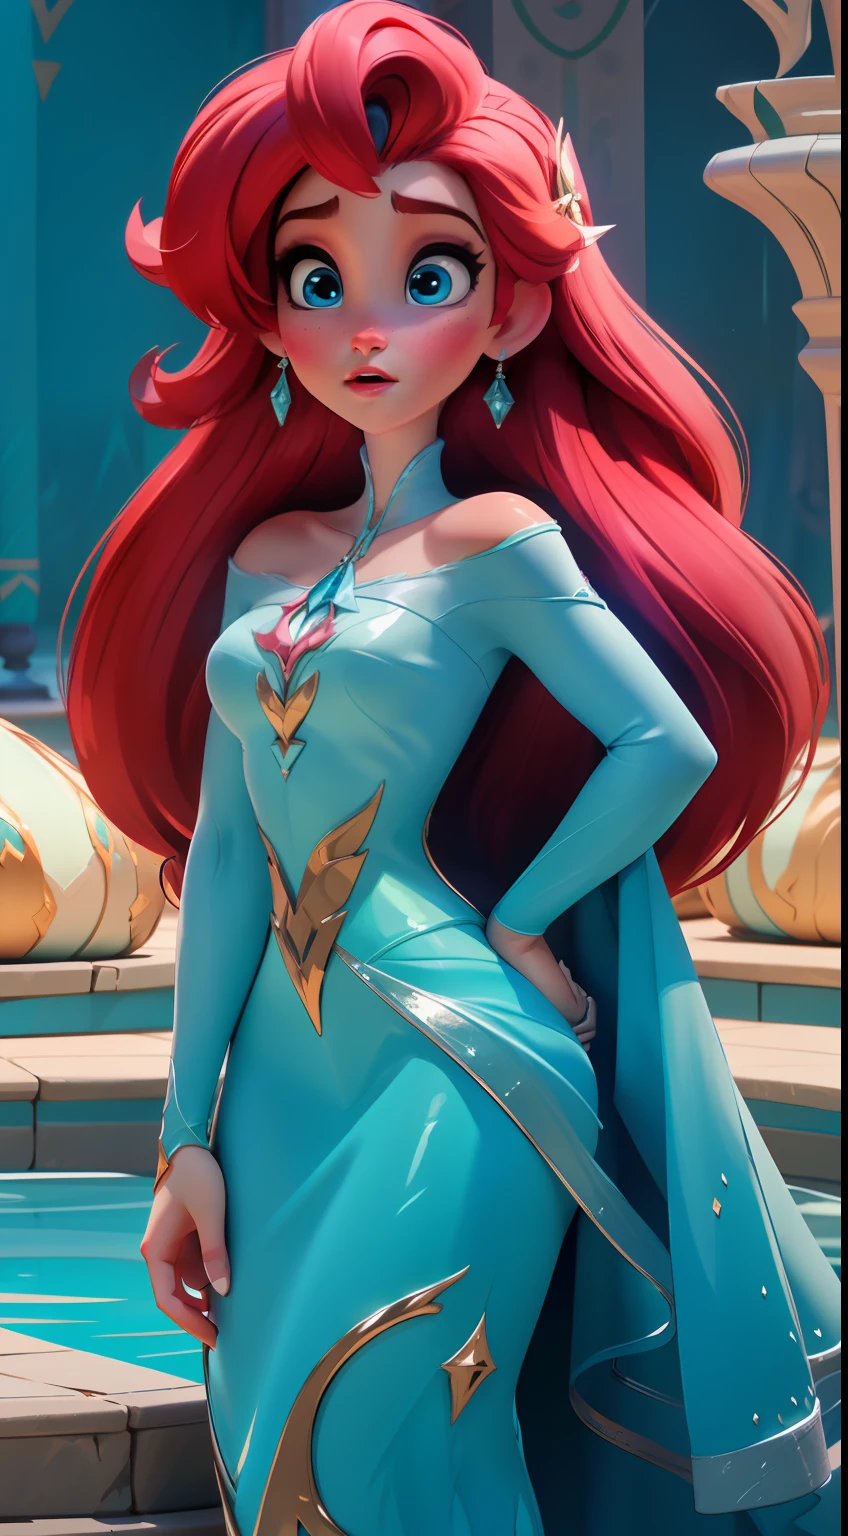 Elsa-Ariel Fusion, Merging models, melting, Ariel&#39;s clothes, 1girl, Beautiful, character, Woman, female, beachfront, (master part:1.2), (best qualityer:1.2), (standing alone:1.2), ((struggling pose)), ((field of battle)), cinemactic, perfects eyes, perfect  skin, perfect lighting, sorrido, Lumiere, Farbe, texturized skin, detail, Beauthfull, wonder wonder wonder wonder wonder wonder wonder wonder wonder wonder wonder wonder wonder wonder wonder wonder wonder wonder wonder wonder wonder wonder wonder wonder wonder wonder wonder wonder wonder wonder wonder wonder, ultra detali, face perfect